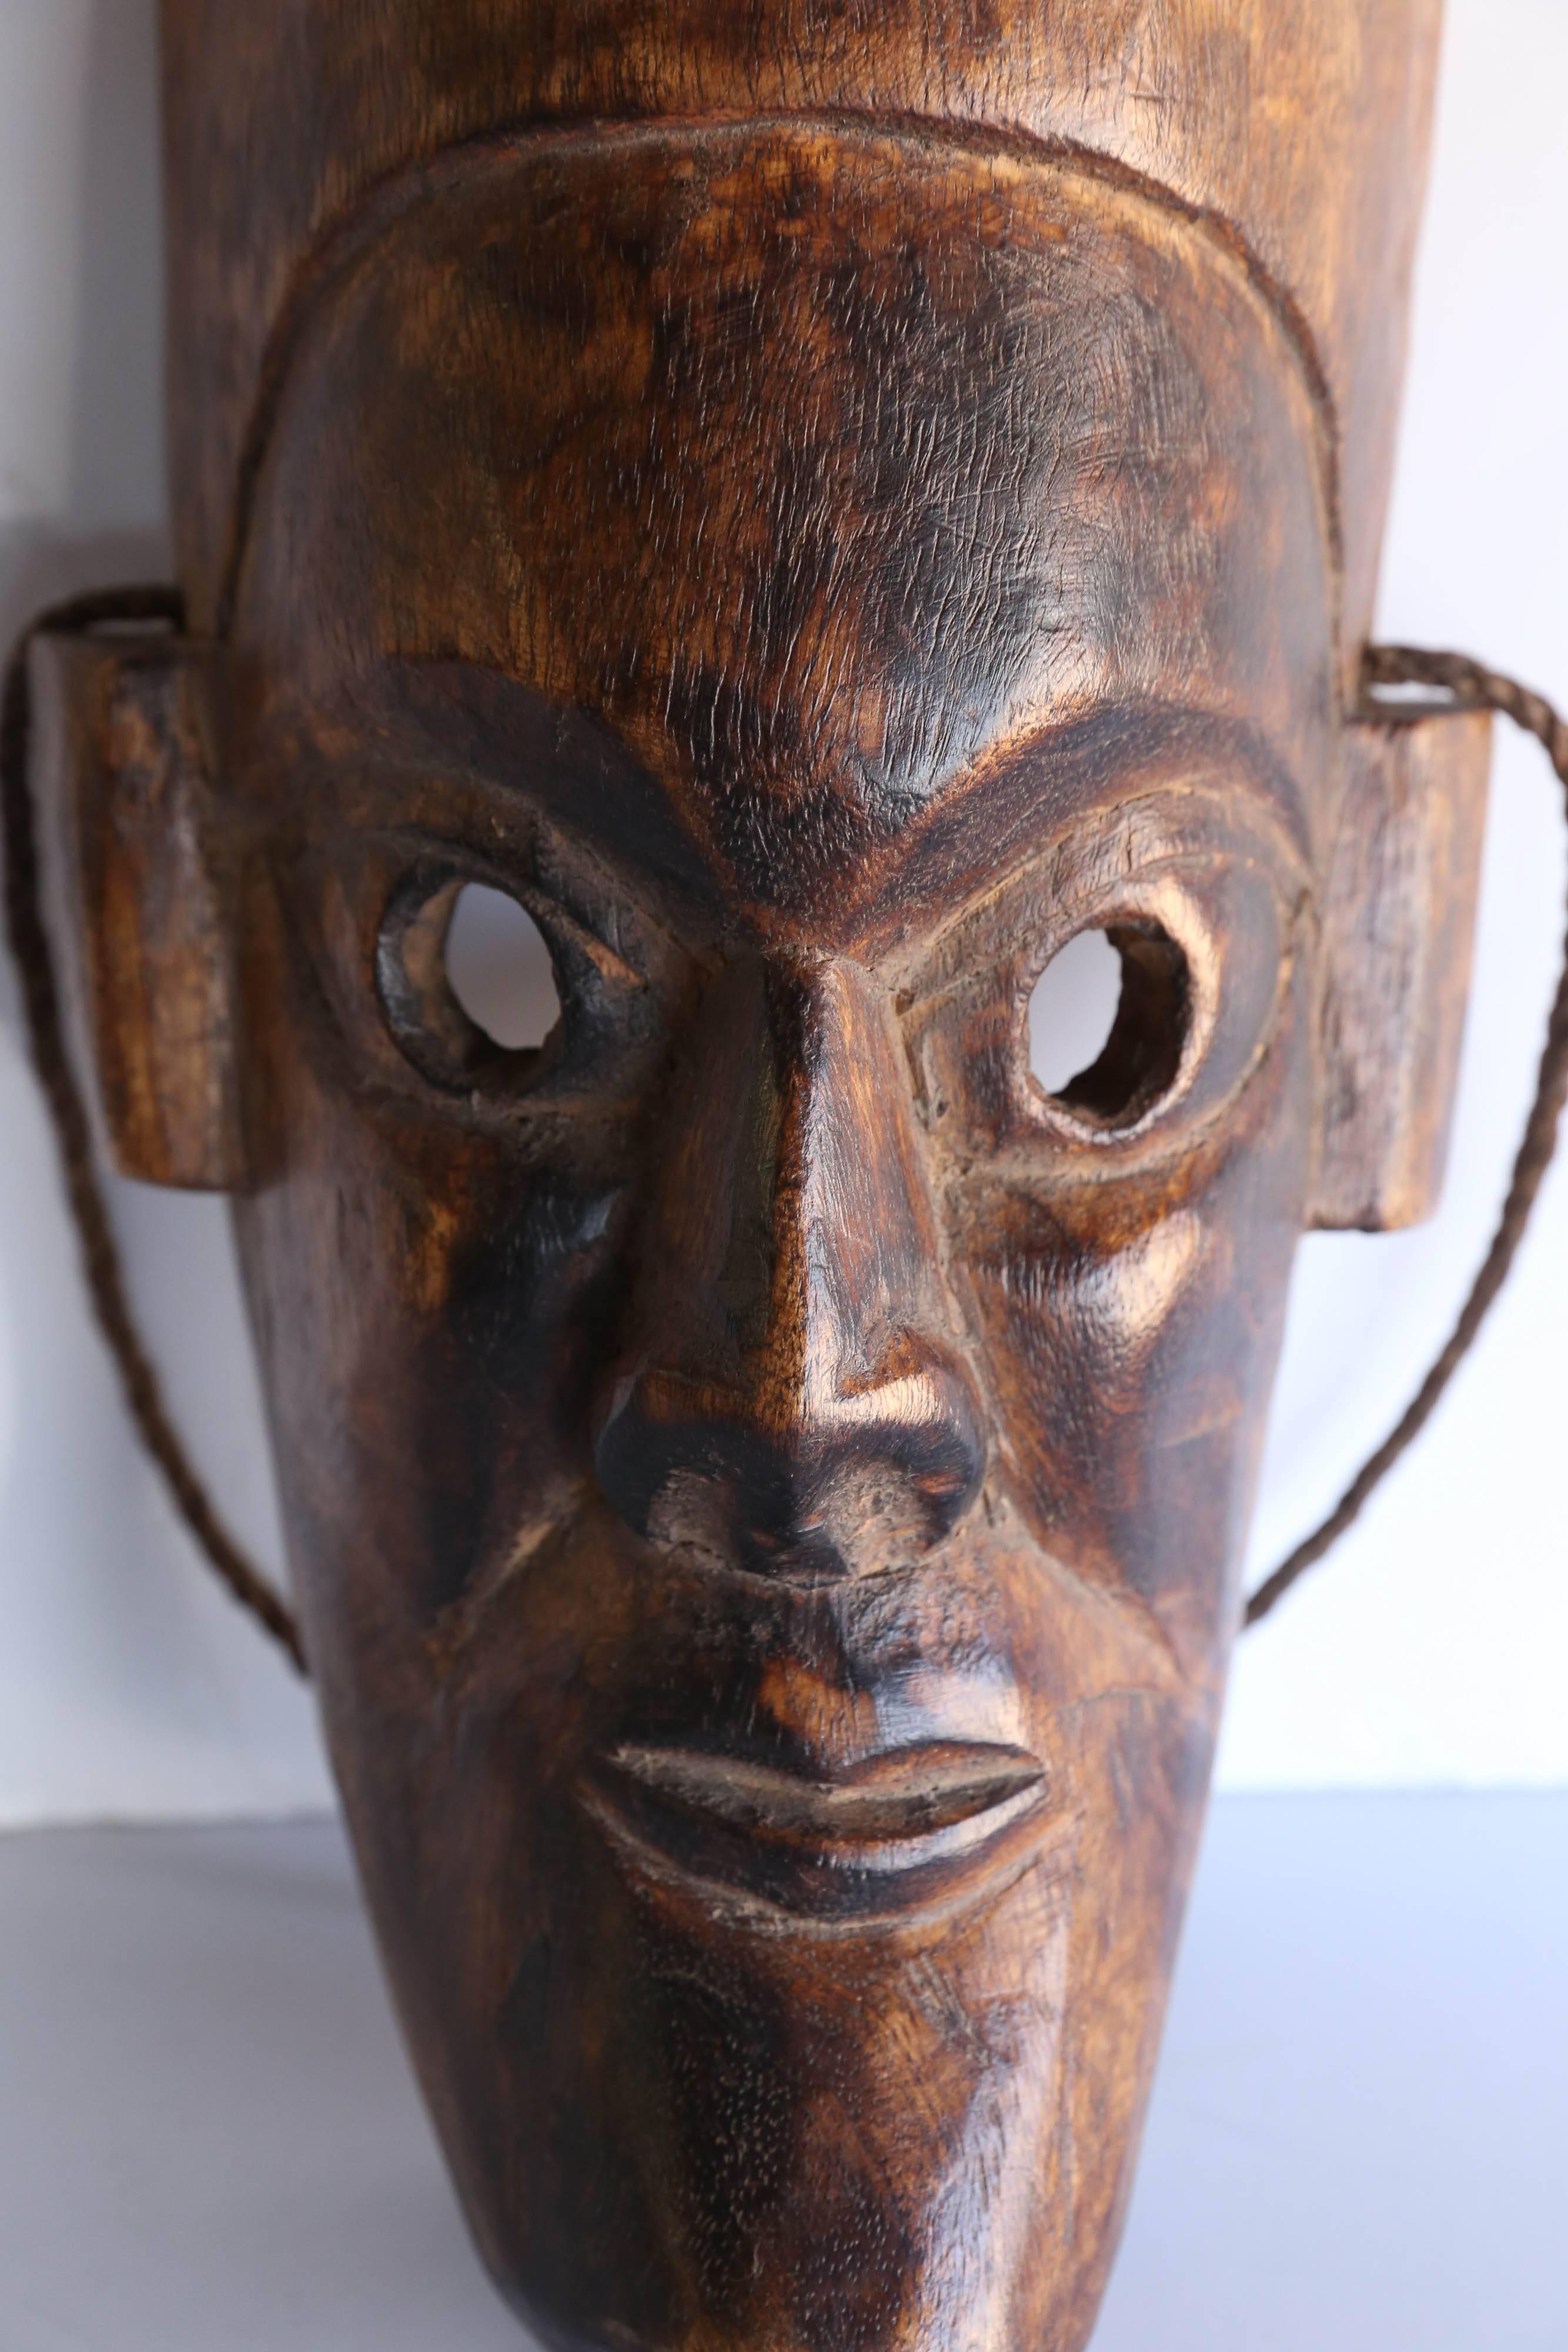 This mask was hand-carved from one block of solid hard wood. It comes from the Himalayan kingdom of Nepal.
During festivals the people wear the masks and march in procession on the streets.